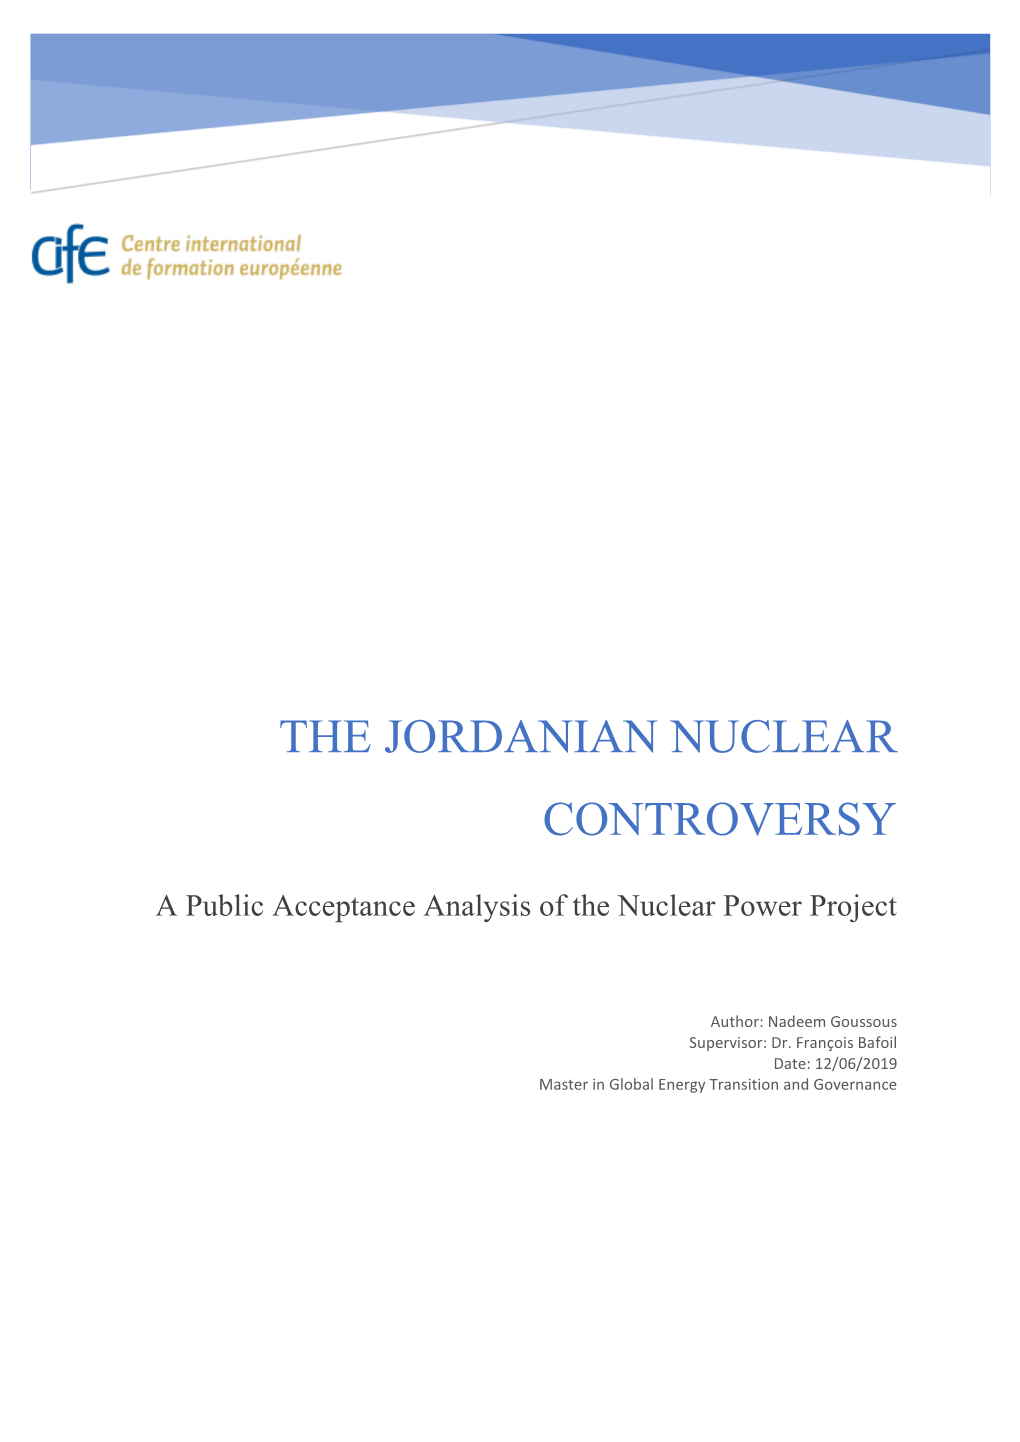 The Jordanian Nuclear Controversy